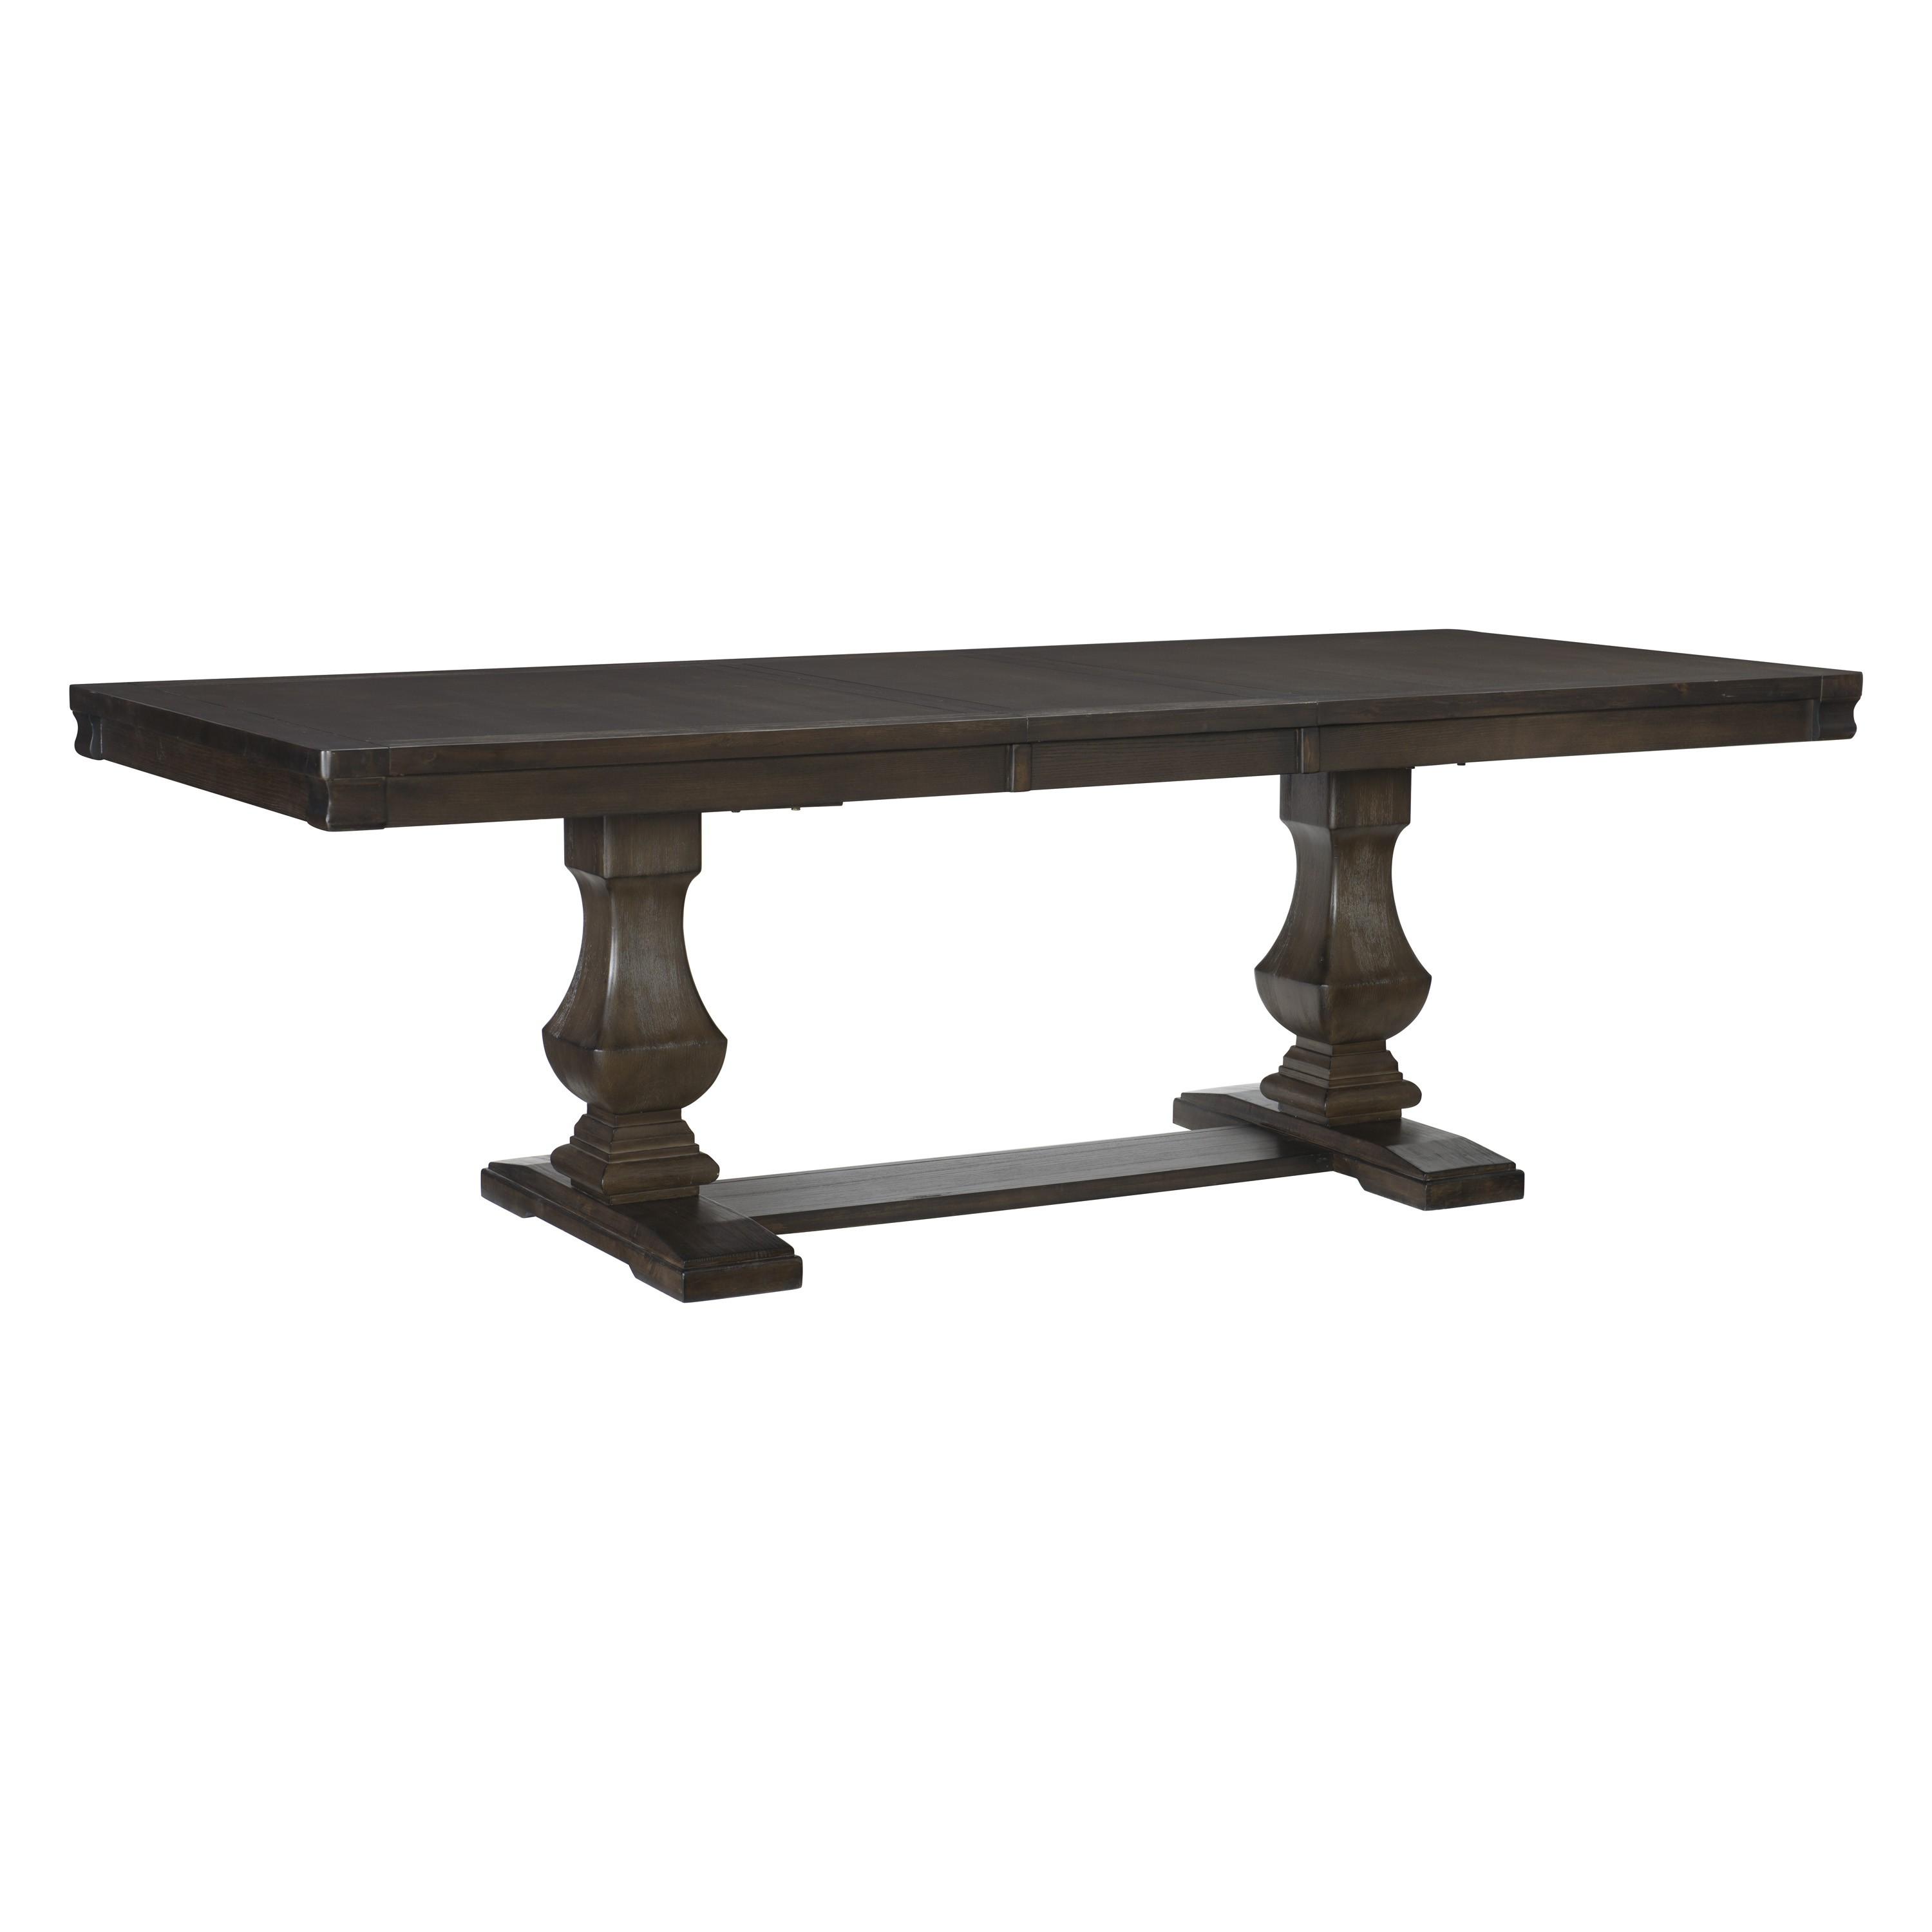 Traditional Dining Table 5741-94* Southlake 5741-94* in Rustic Brown 